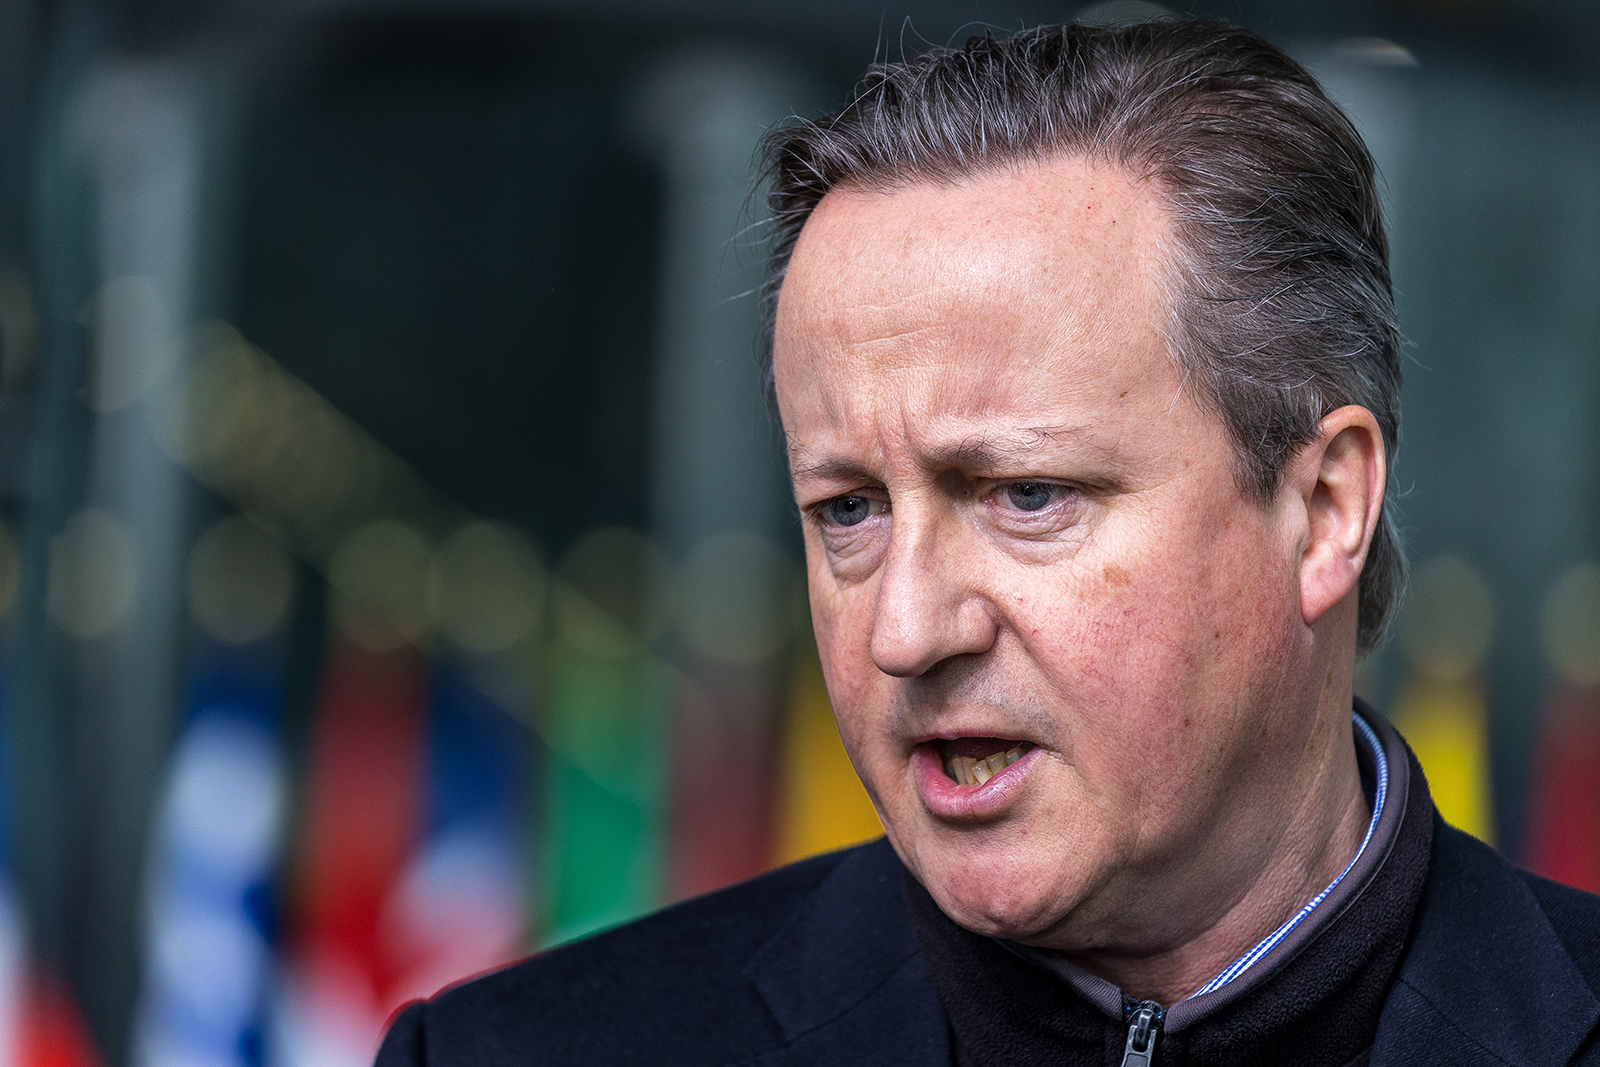 British Foreign Secretary David Cameron speaks to members of the press at NATO headquarters in Brussels, Belgium, on April 3. 